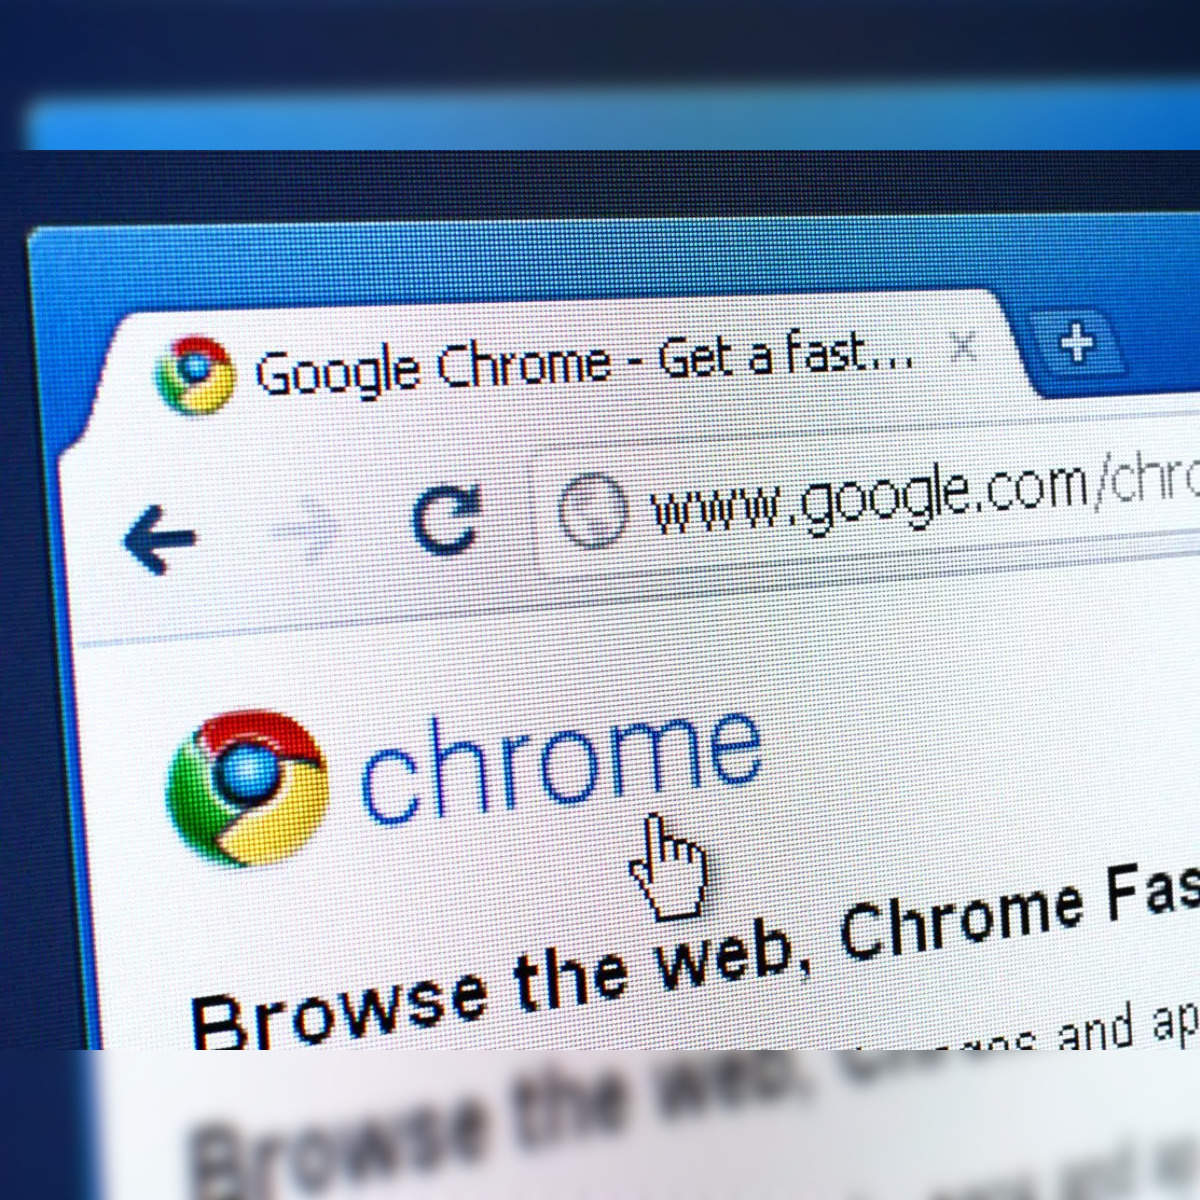 How to Fix Google Chrome's Out of Memory Error